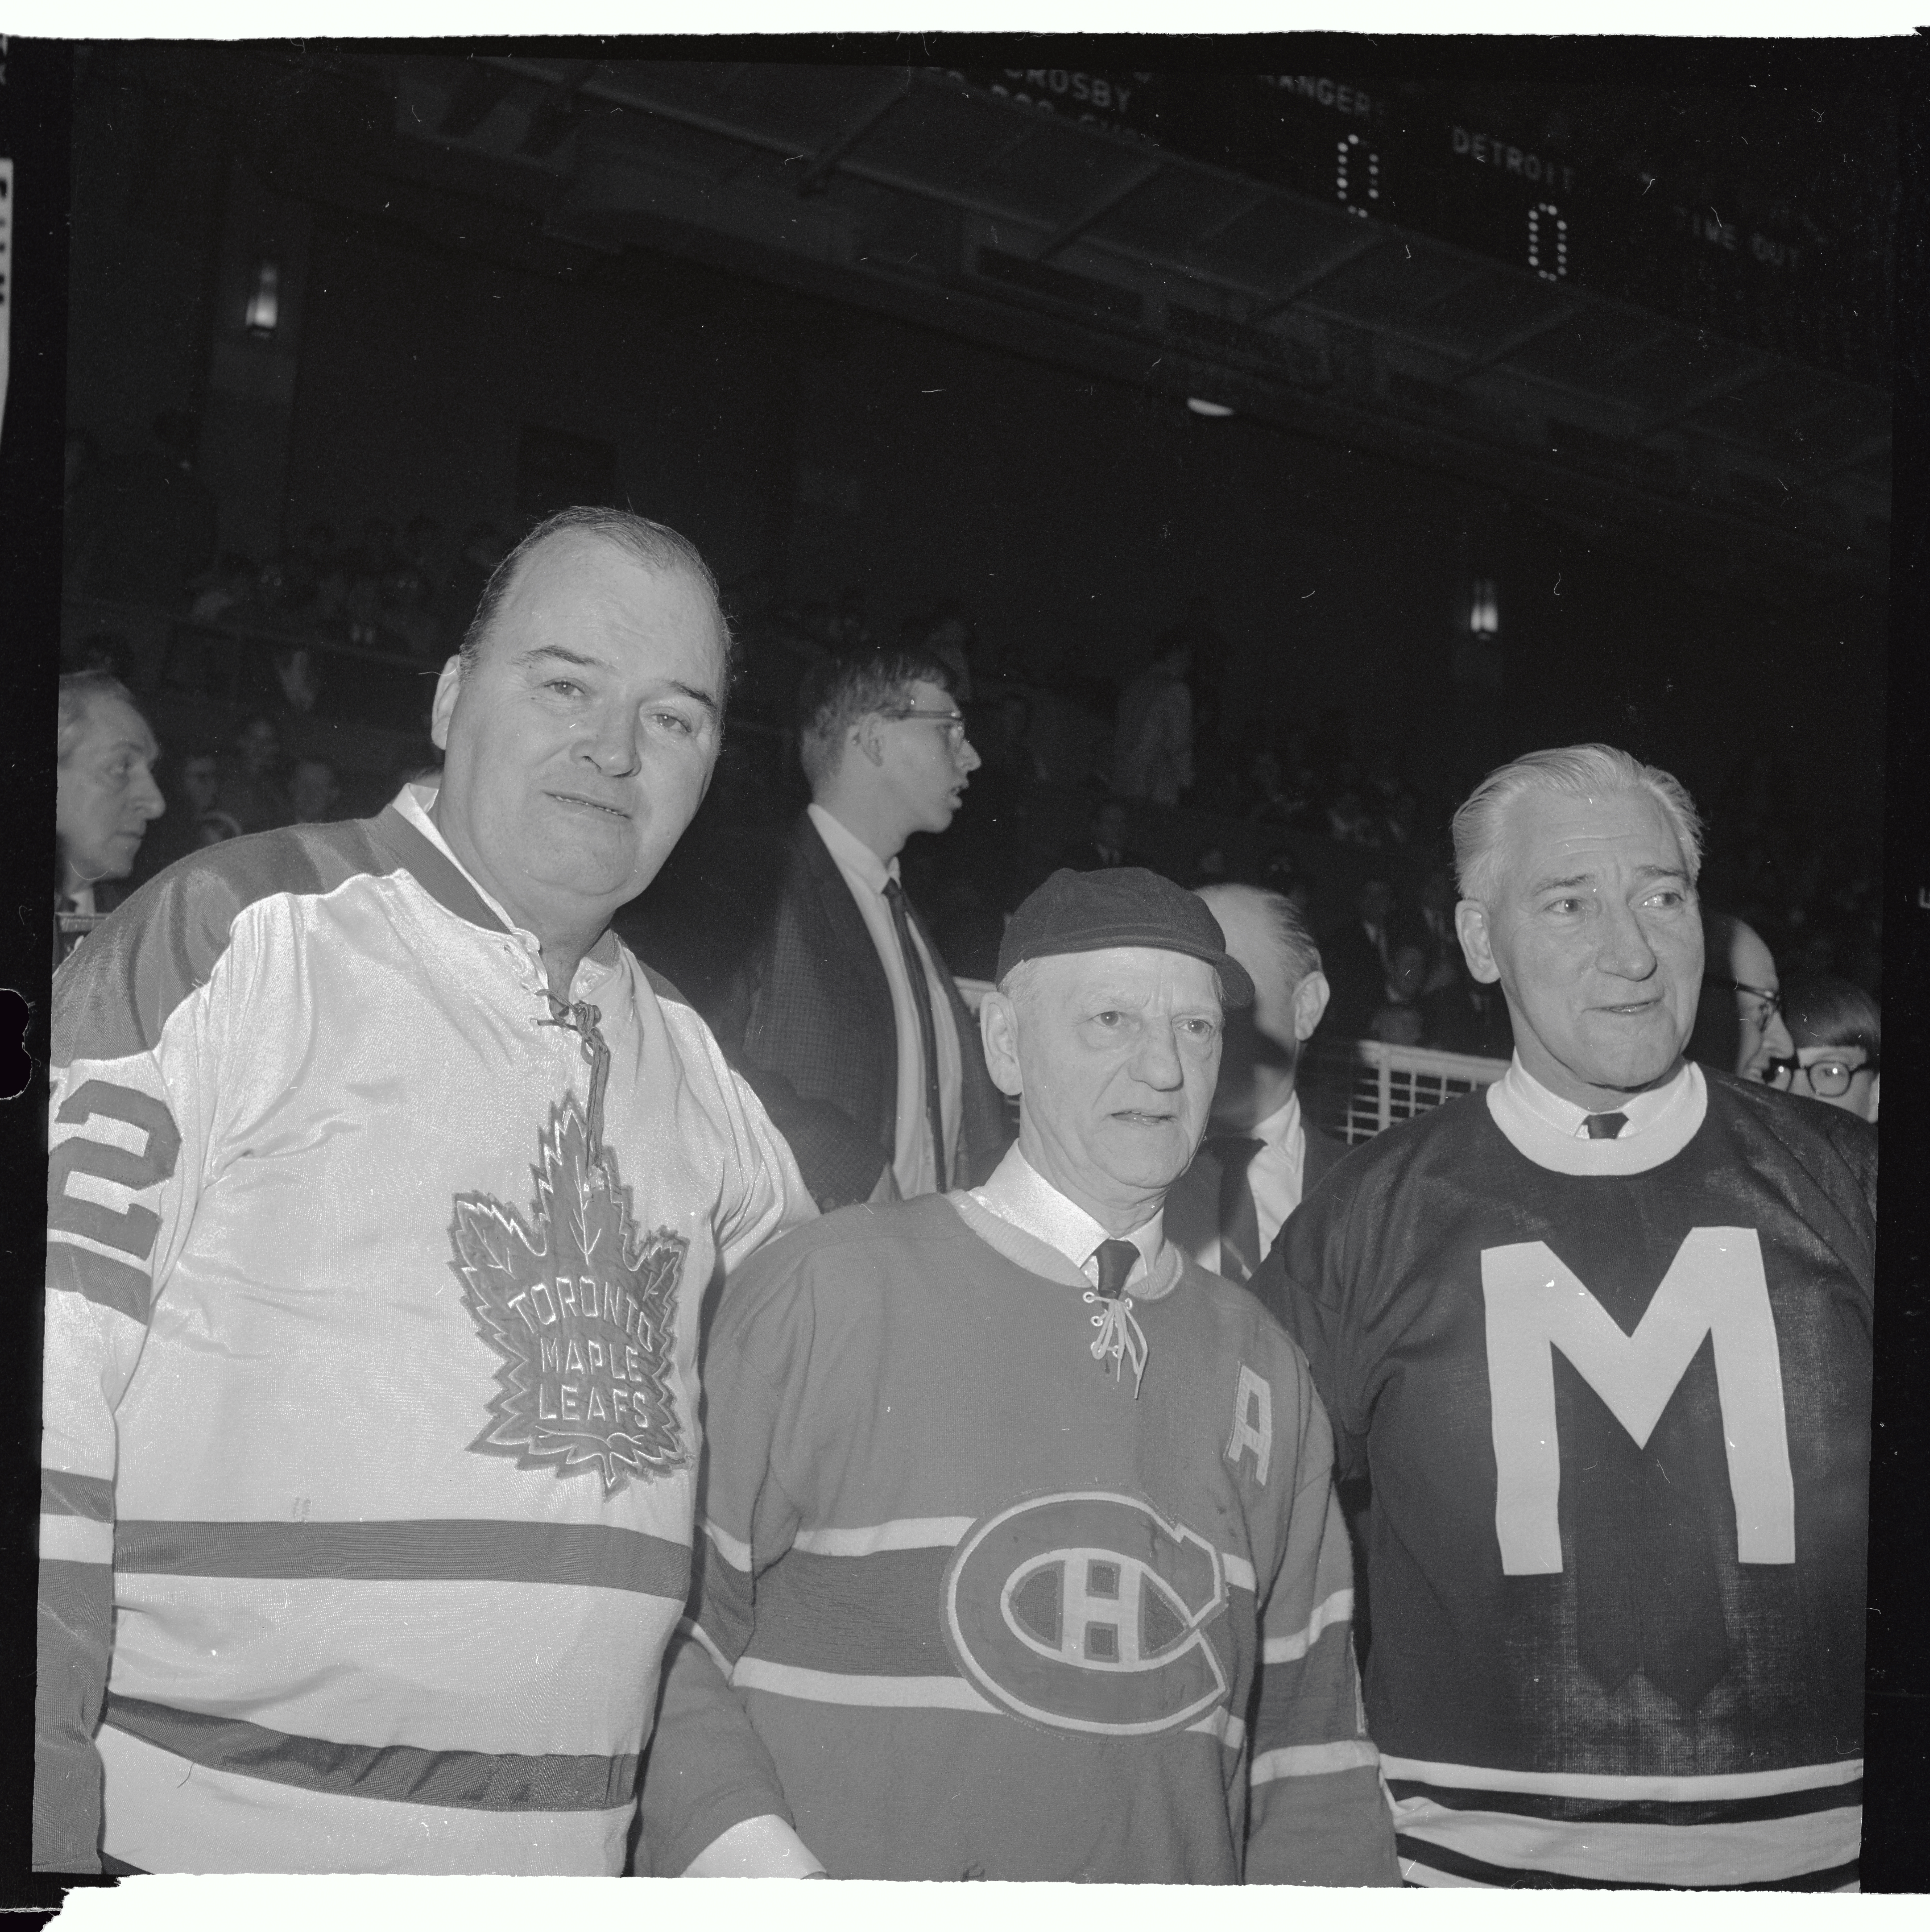 (Original Caption) At the Madison Square Garden celebration for old time hockey professionals are Gordon Drillon, (L) of Toronto, Aurel Joliat, (C) of Montreal, and Baldy Northcott of Montreal.